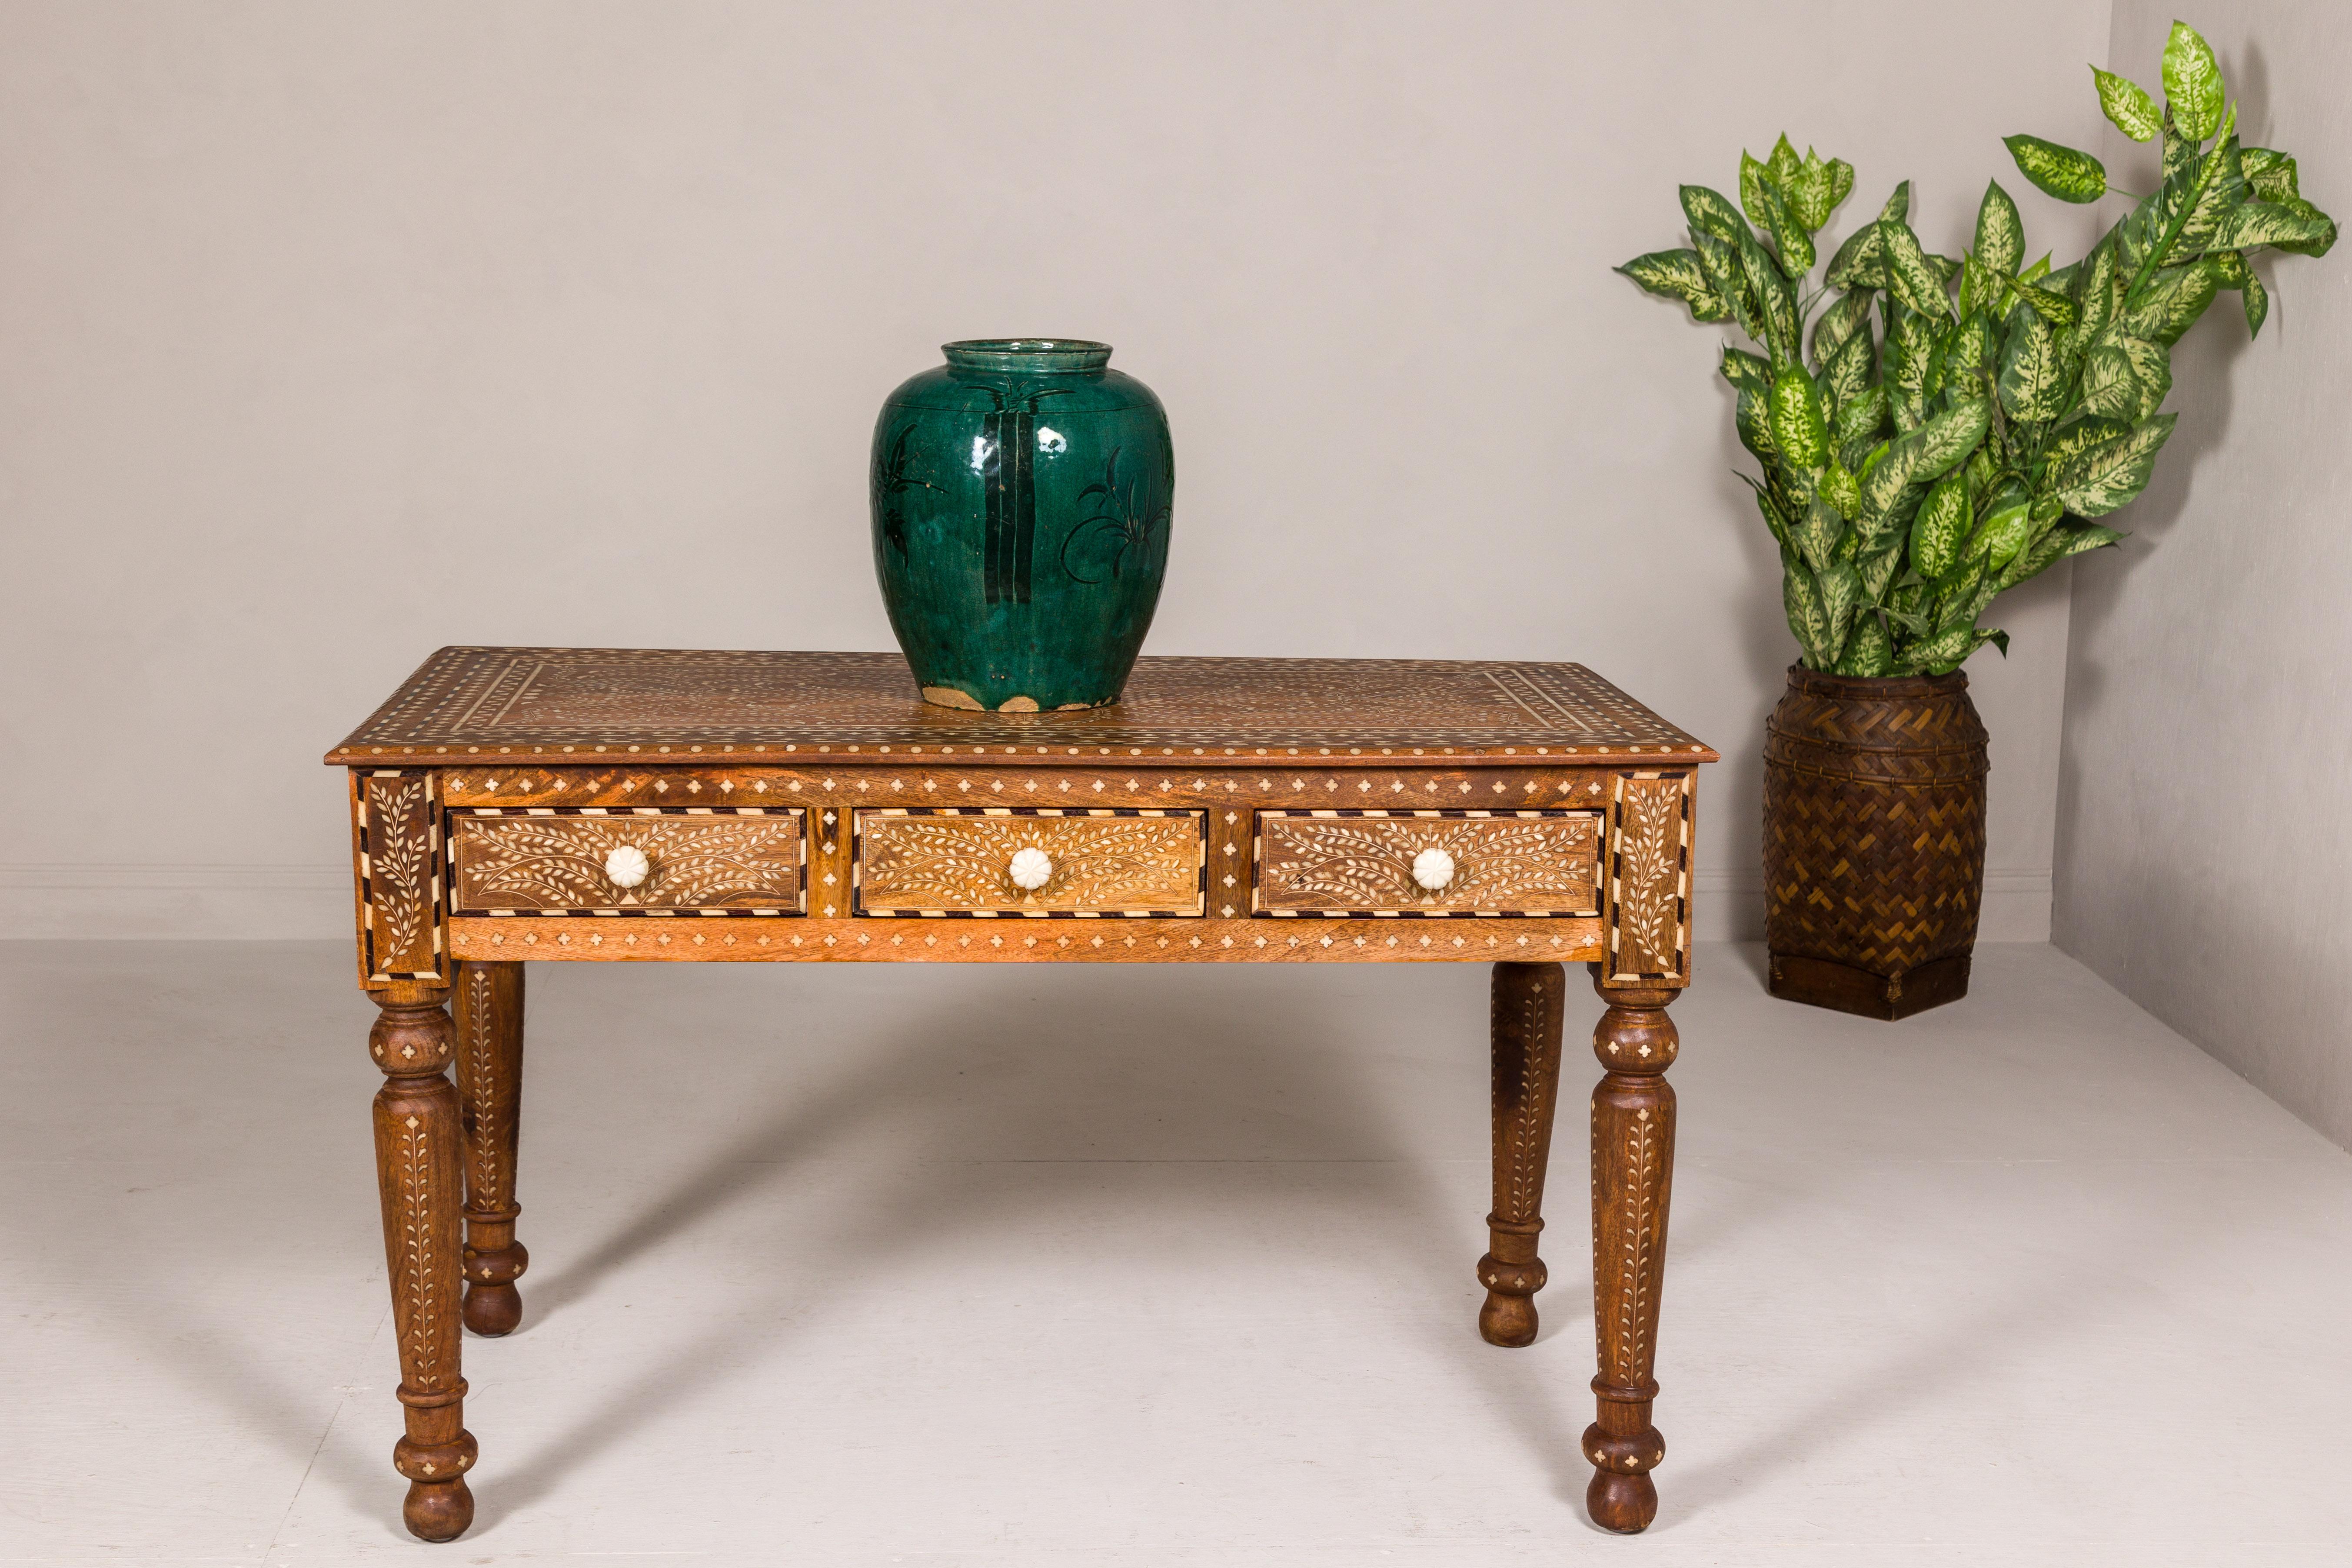 An Anglo-Indian style mango wood console table or desk with inlaid bone décor, three drawers and turned legs. Behold the ornate artistry of this Anglo-Indian style mango wood console table or desk, an epitome of craftsmanship that transcends